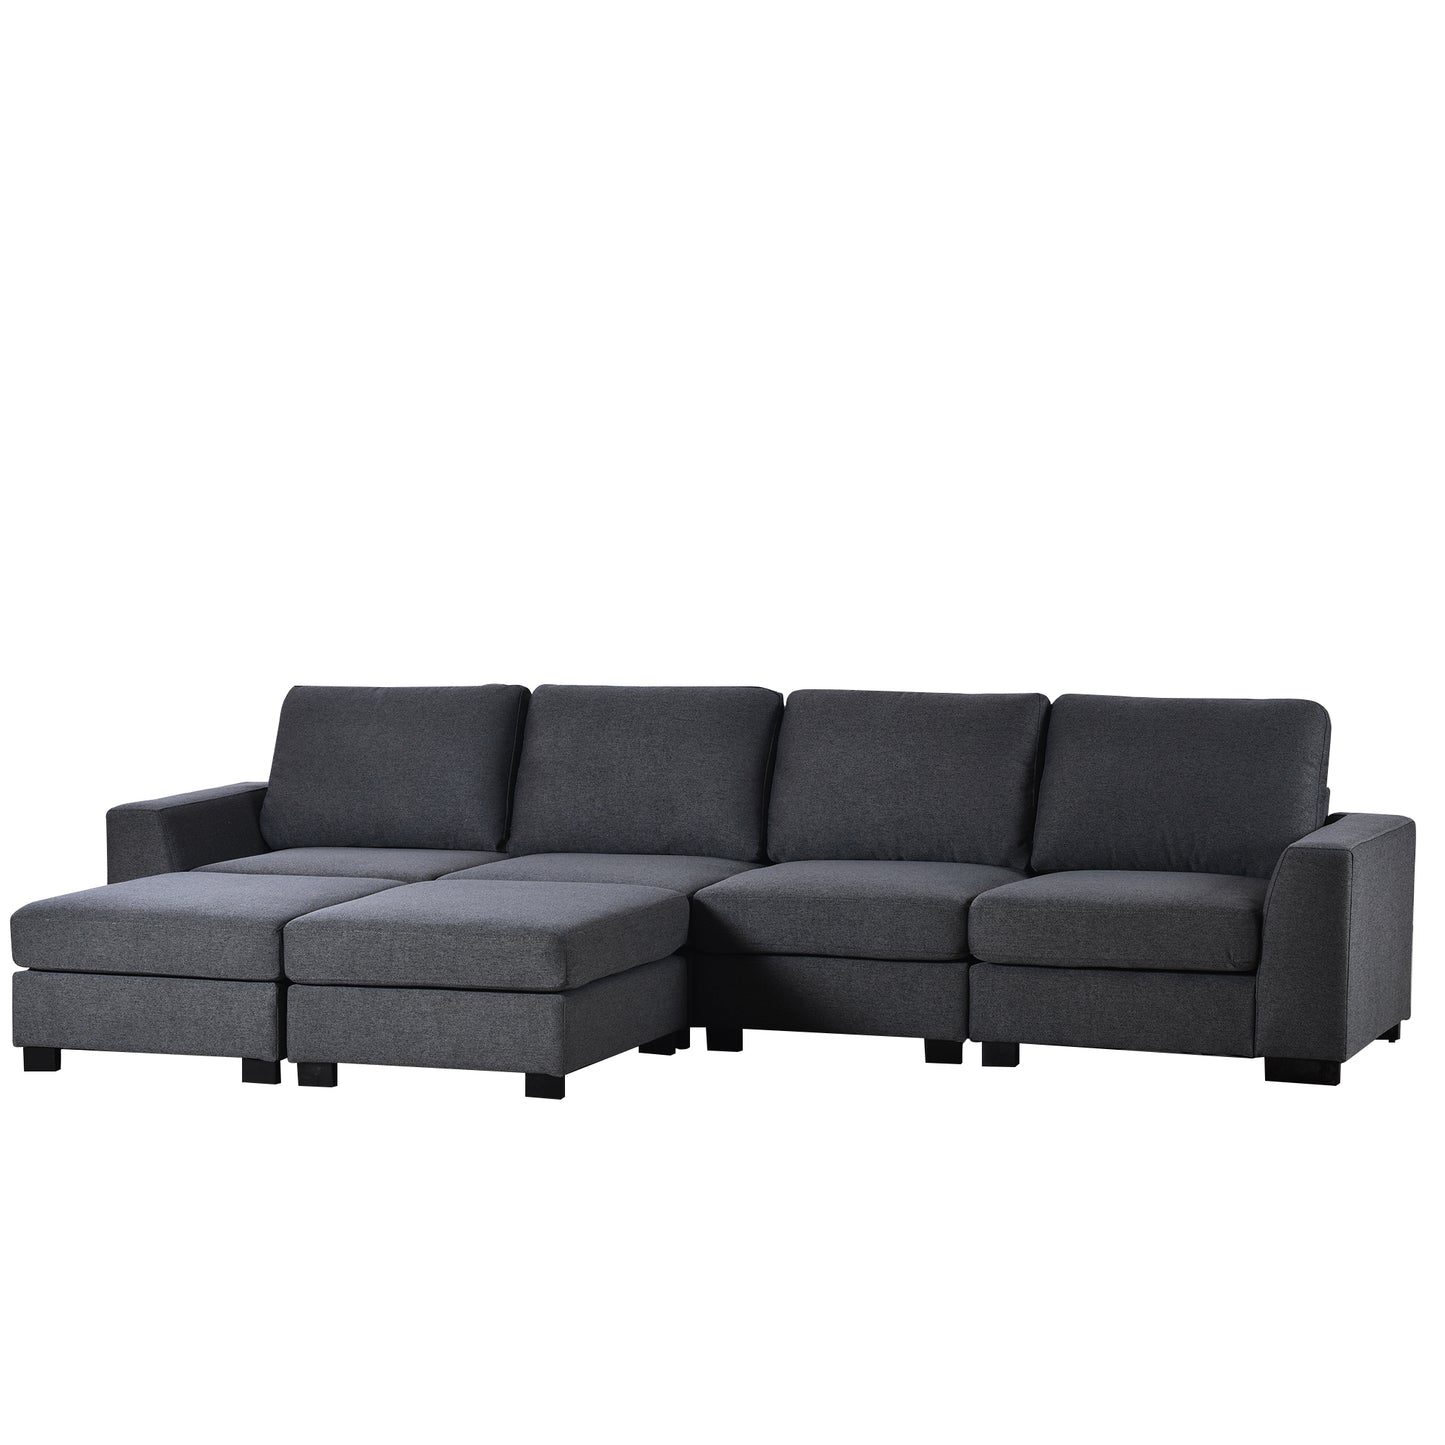 3 Pieces U shaped Sofa with Removable Ottomans - Grey